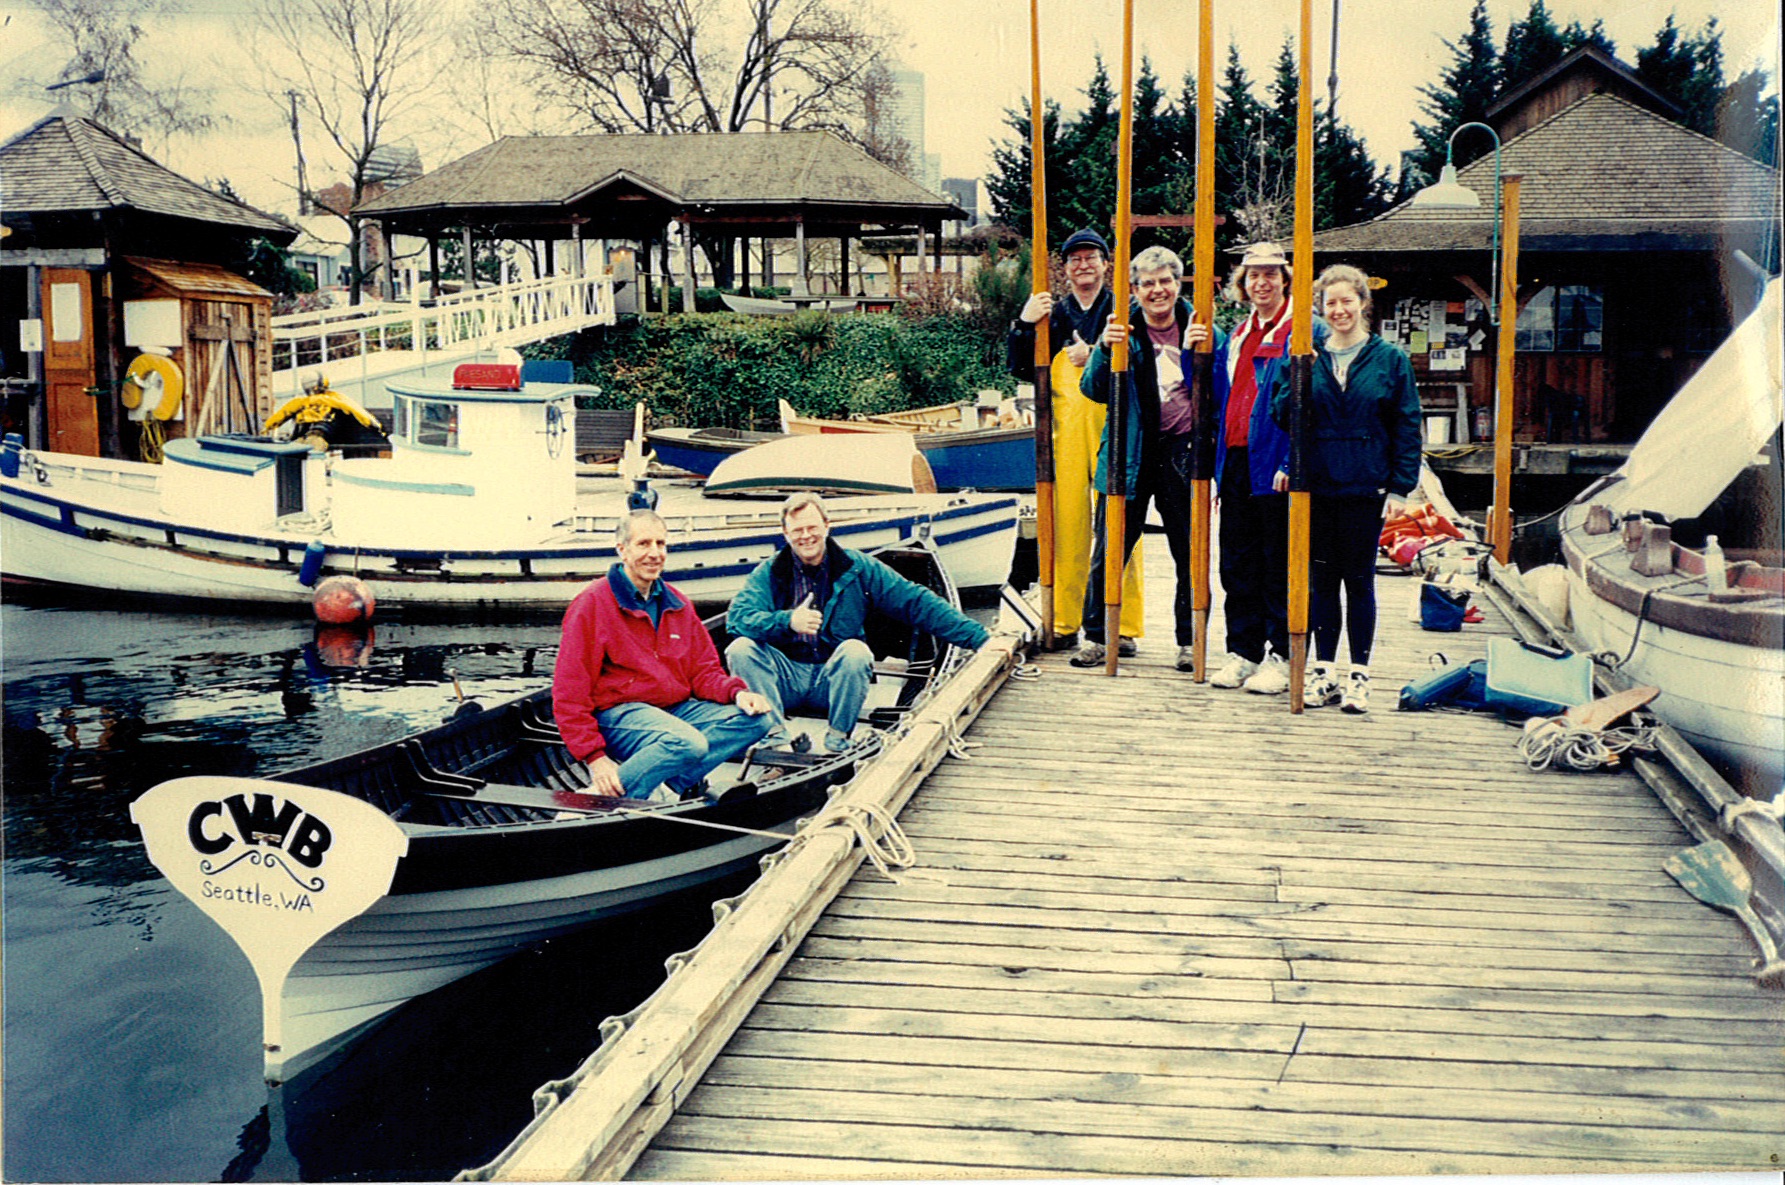 Volunteers standing on the dock holding large sweeps